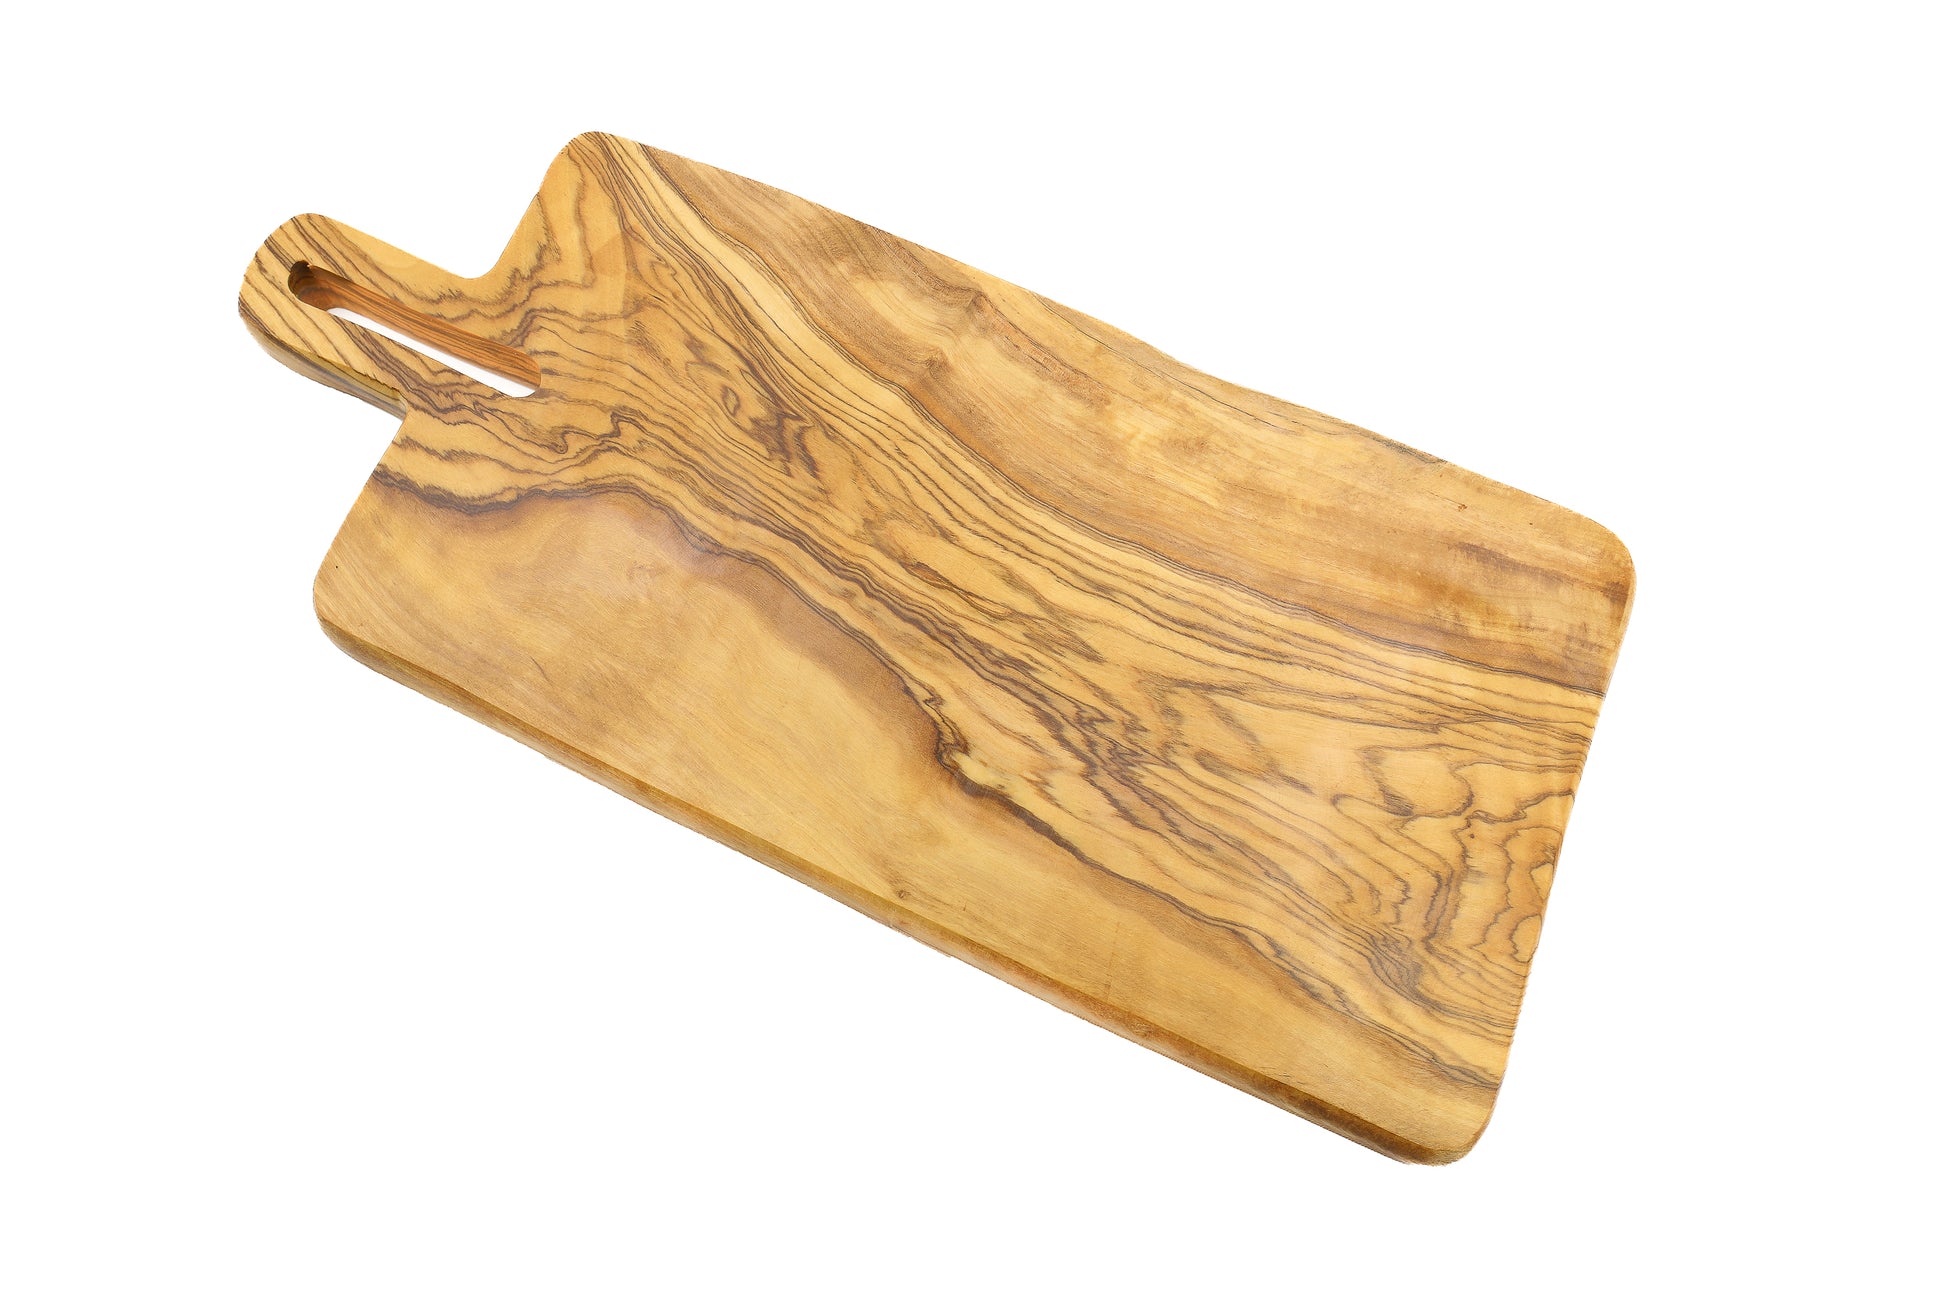 High-quality olive wood serving board with a touch of elegance